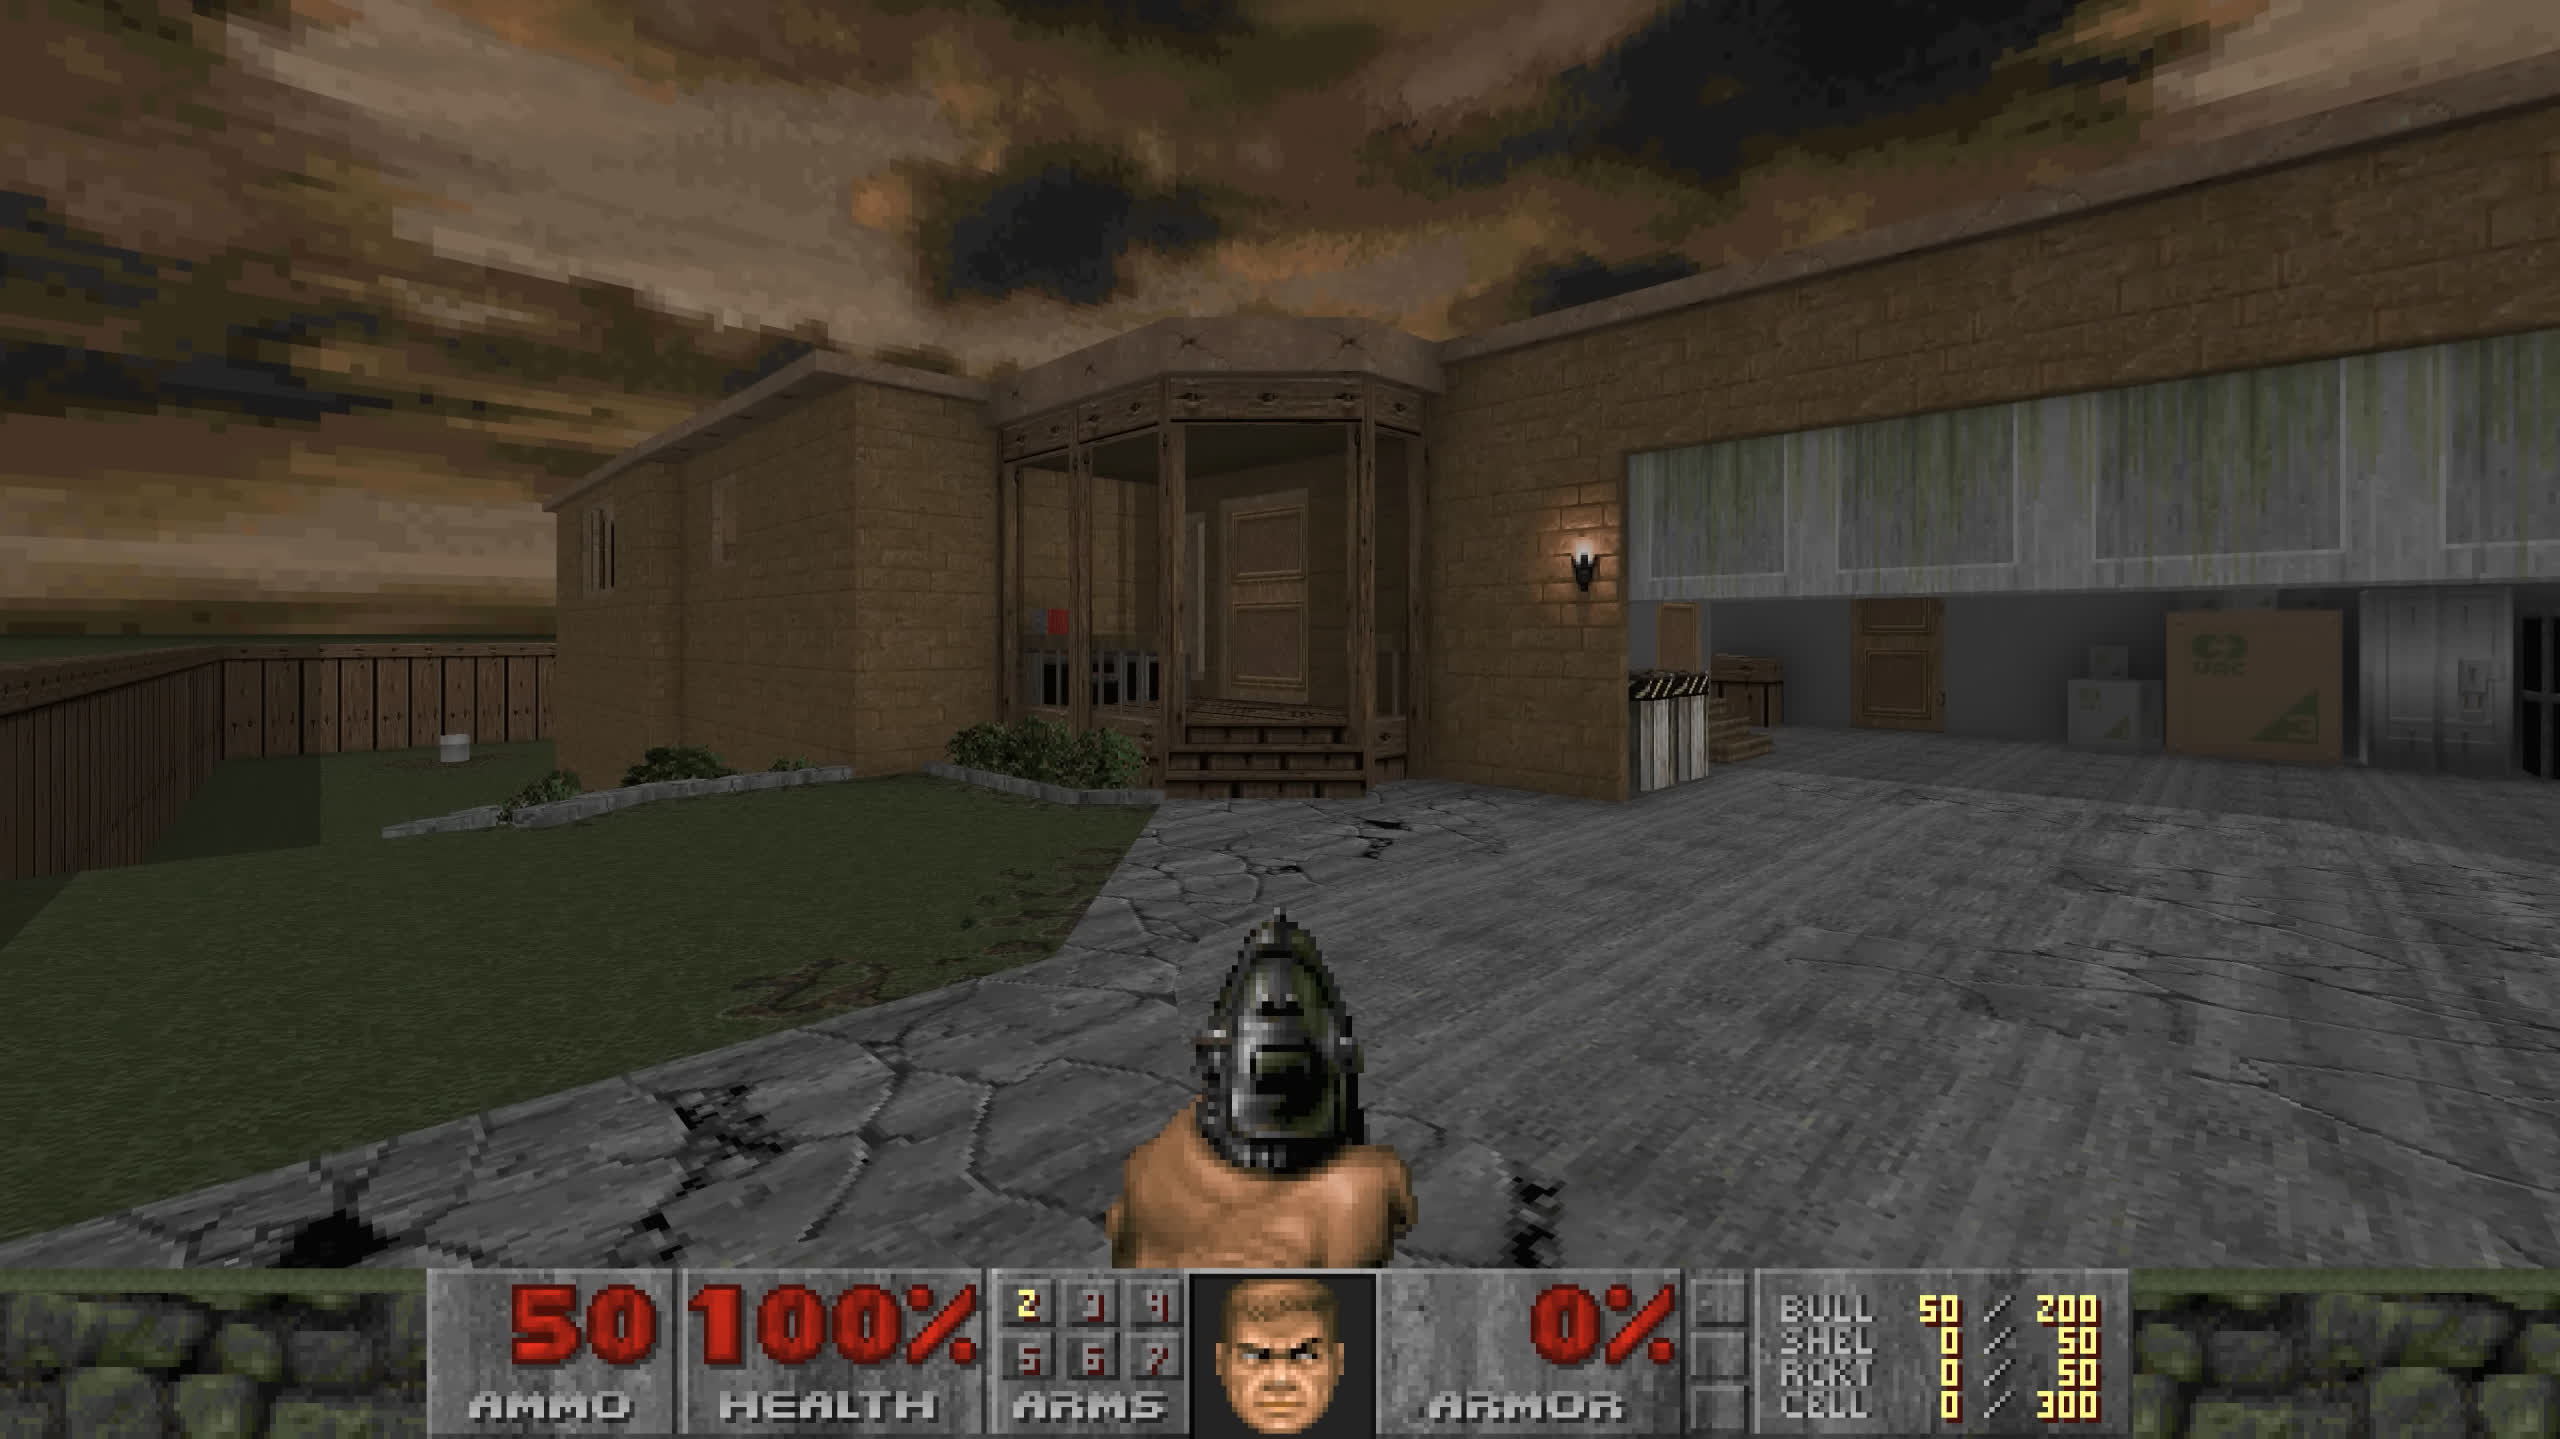 The MyHouse Doom 2 mod is a masterpiece of creepy map editing